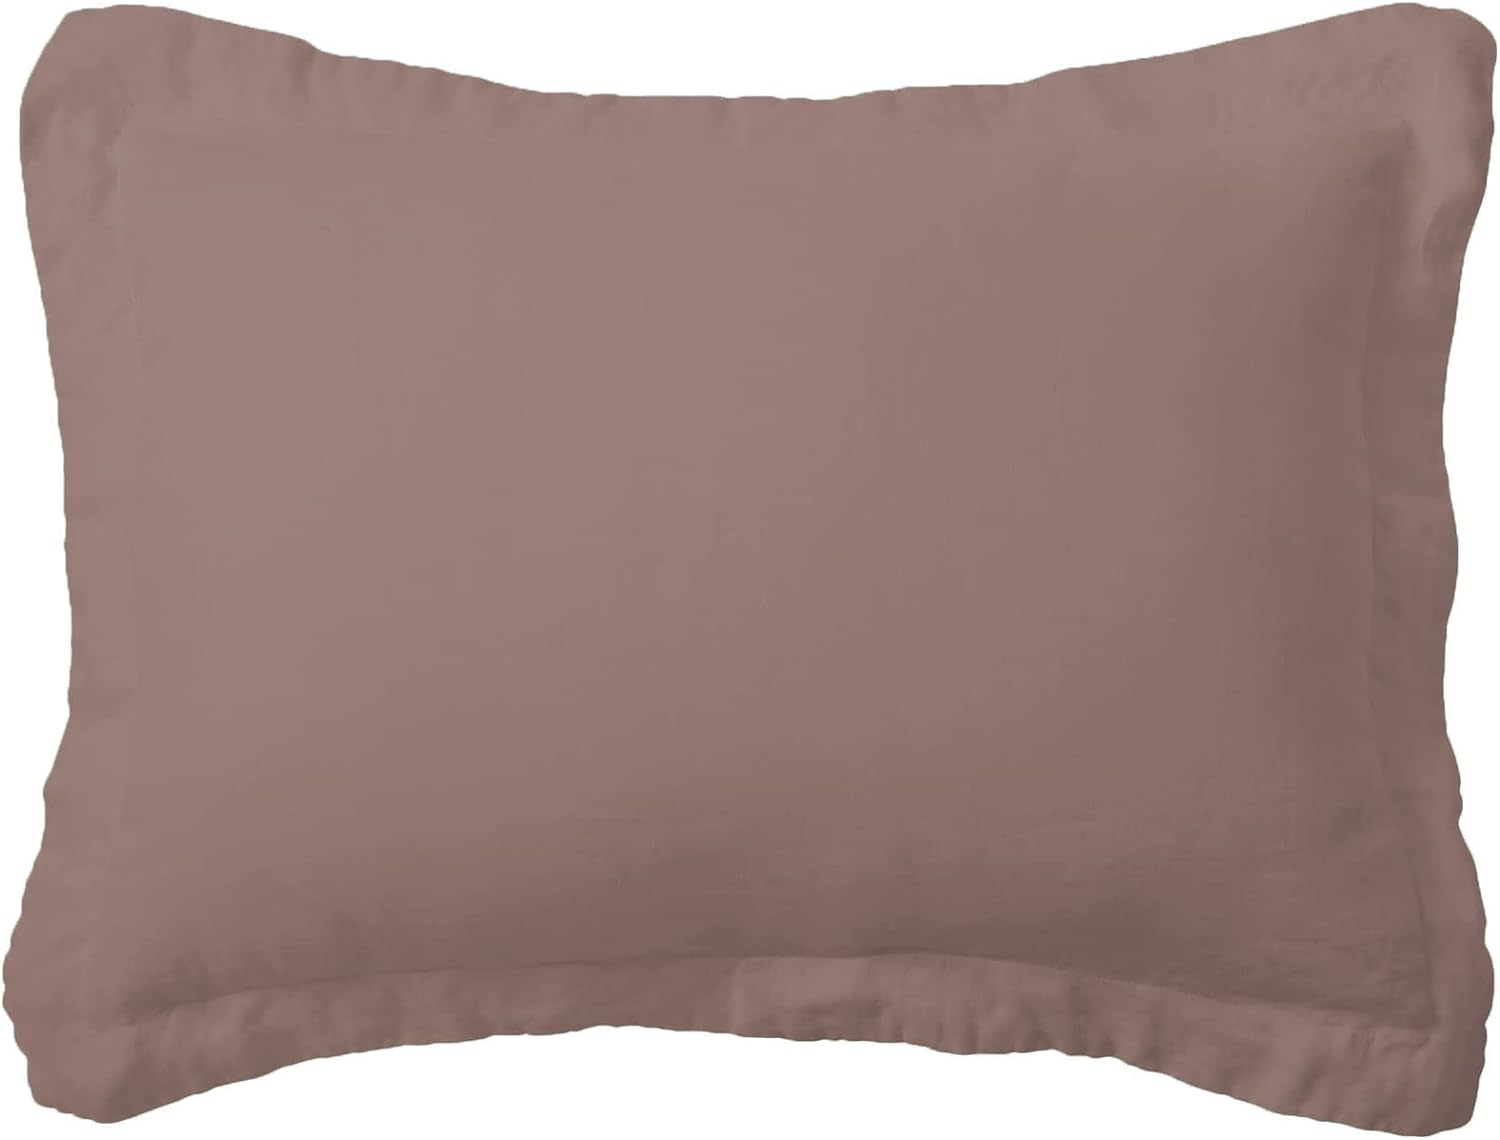 THREAD SPREAD Pillow Shams Set of 2 Taupe 1000 Thread Count 100% Cotton Pack of 2 King 21 x 41 Taupe Pillow Shams Cushion Cover, Cases Super Soft Decorative